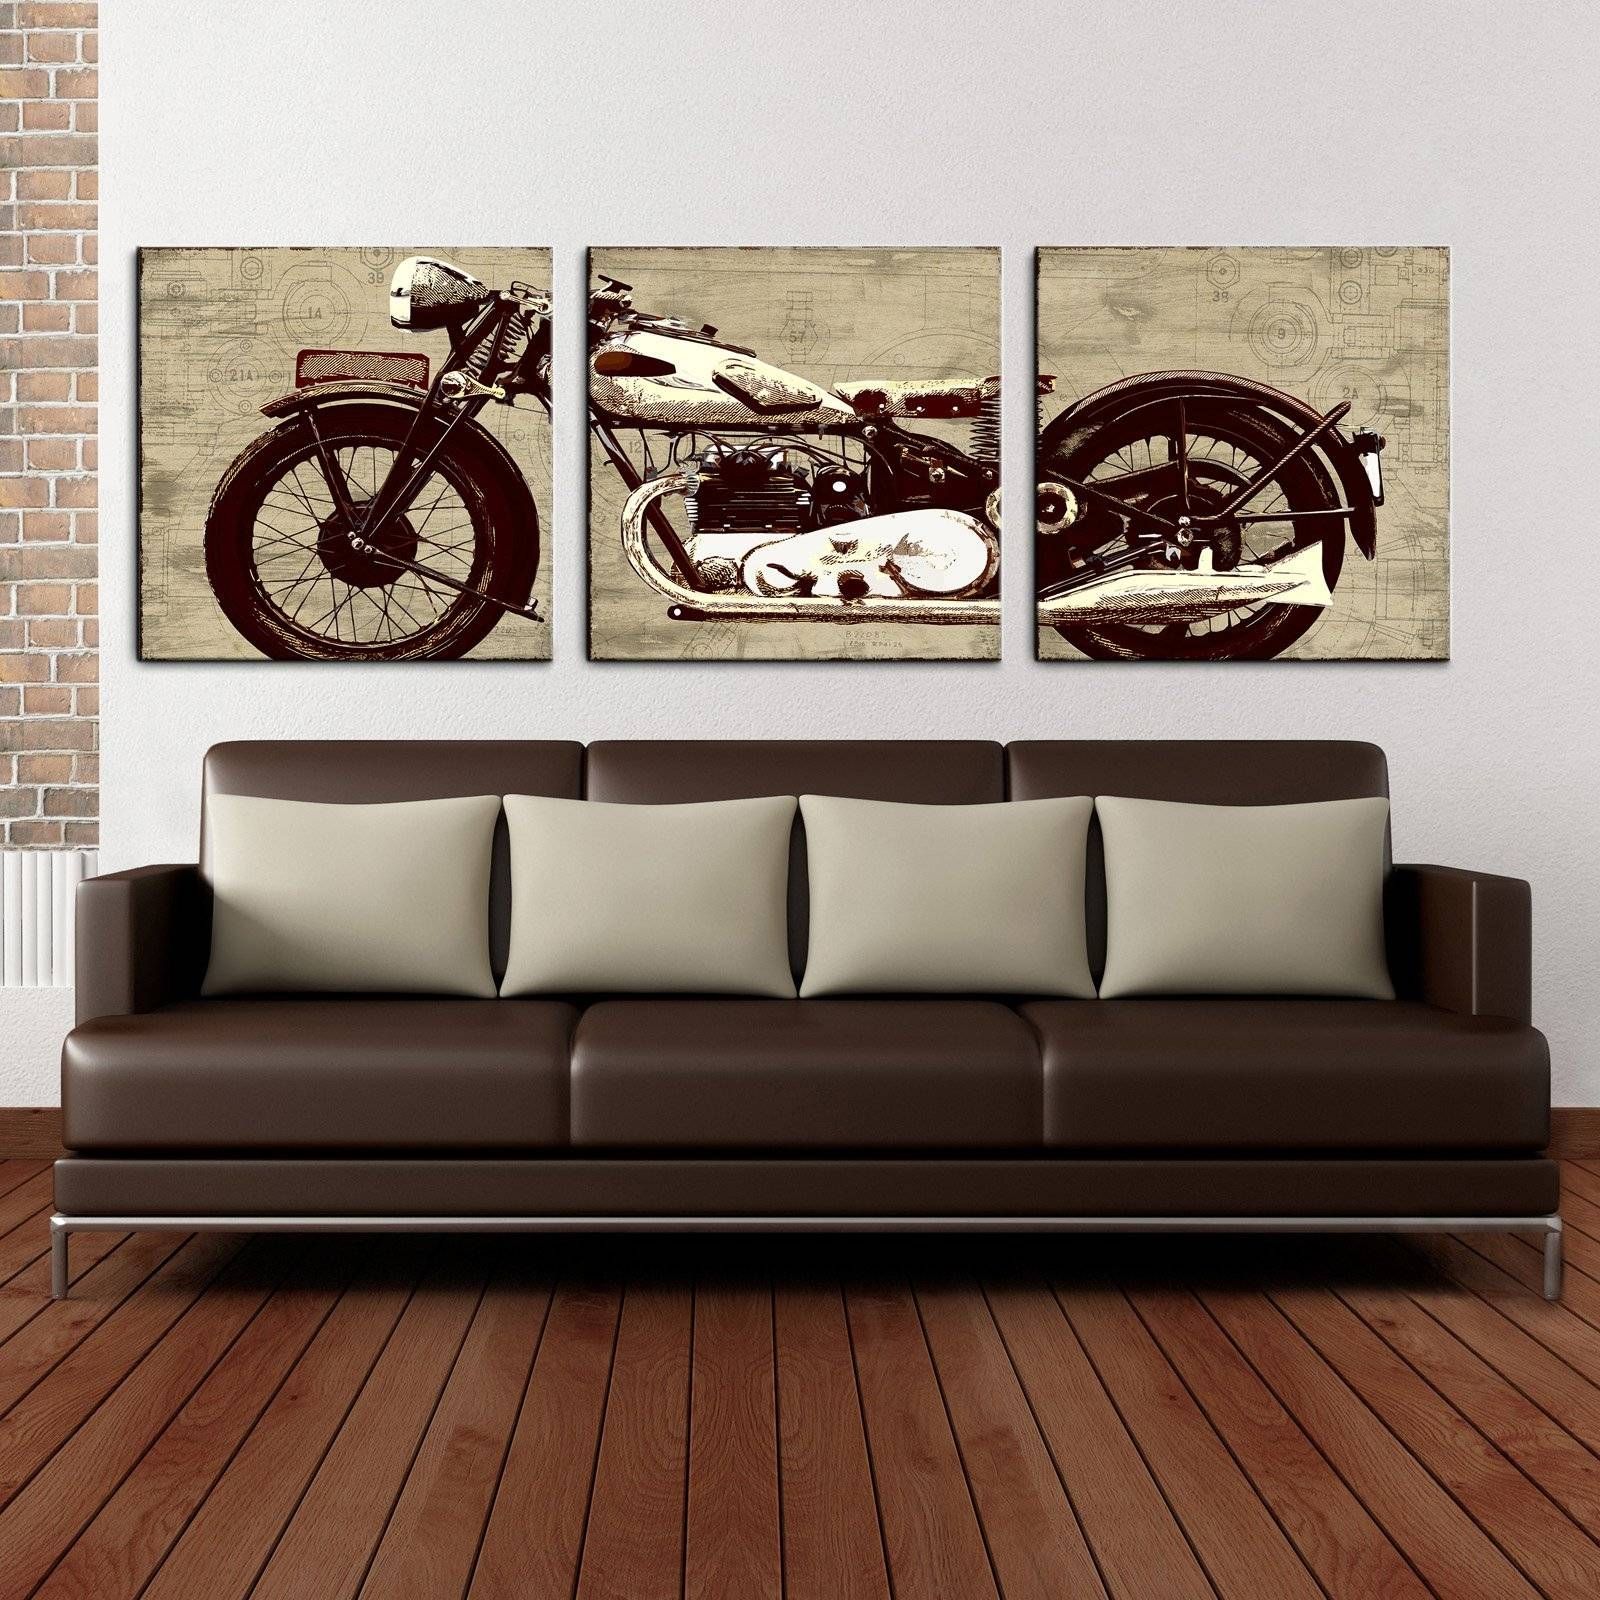 Motorcycle 24 X 72 Canvas Art Print Triptych | Hayneedle For Current Triptych Art For Sale (View 19 of 20)